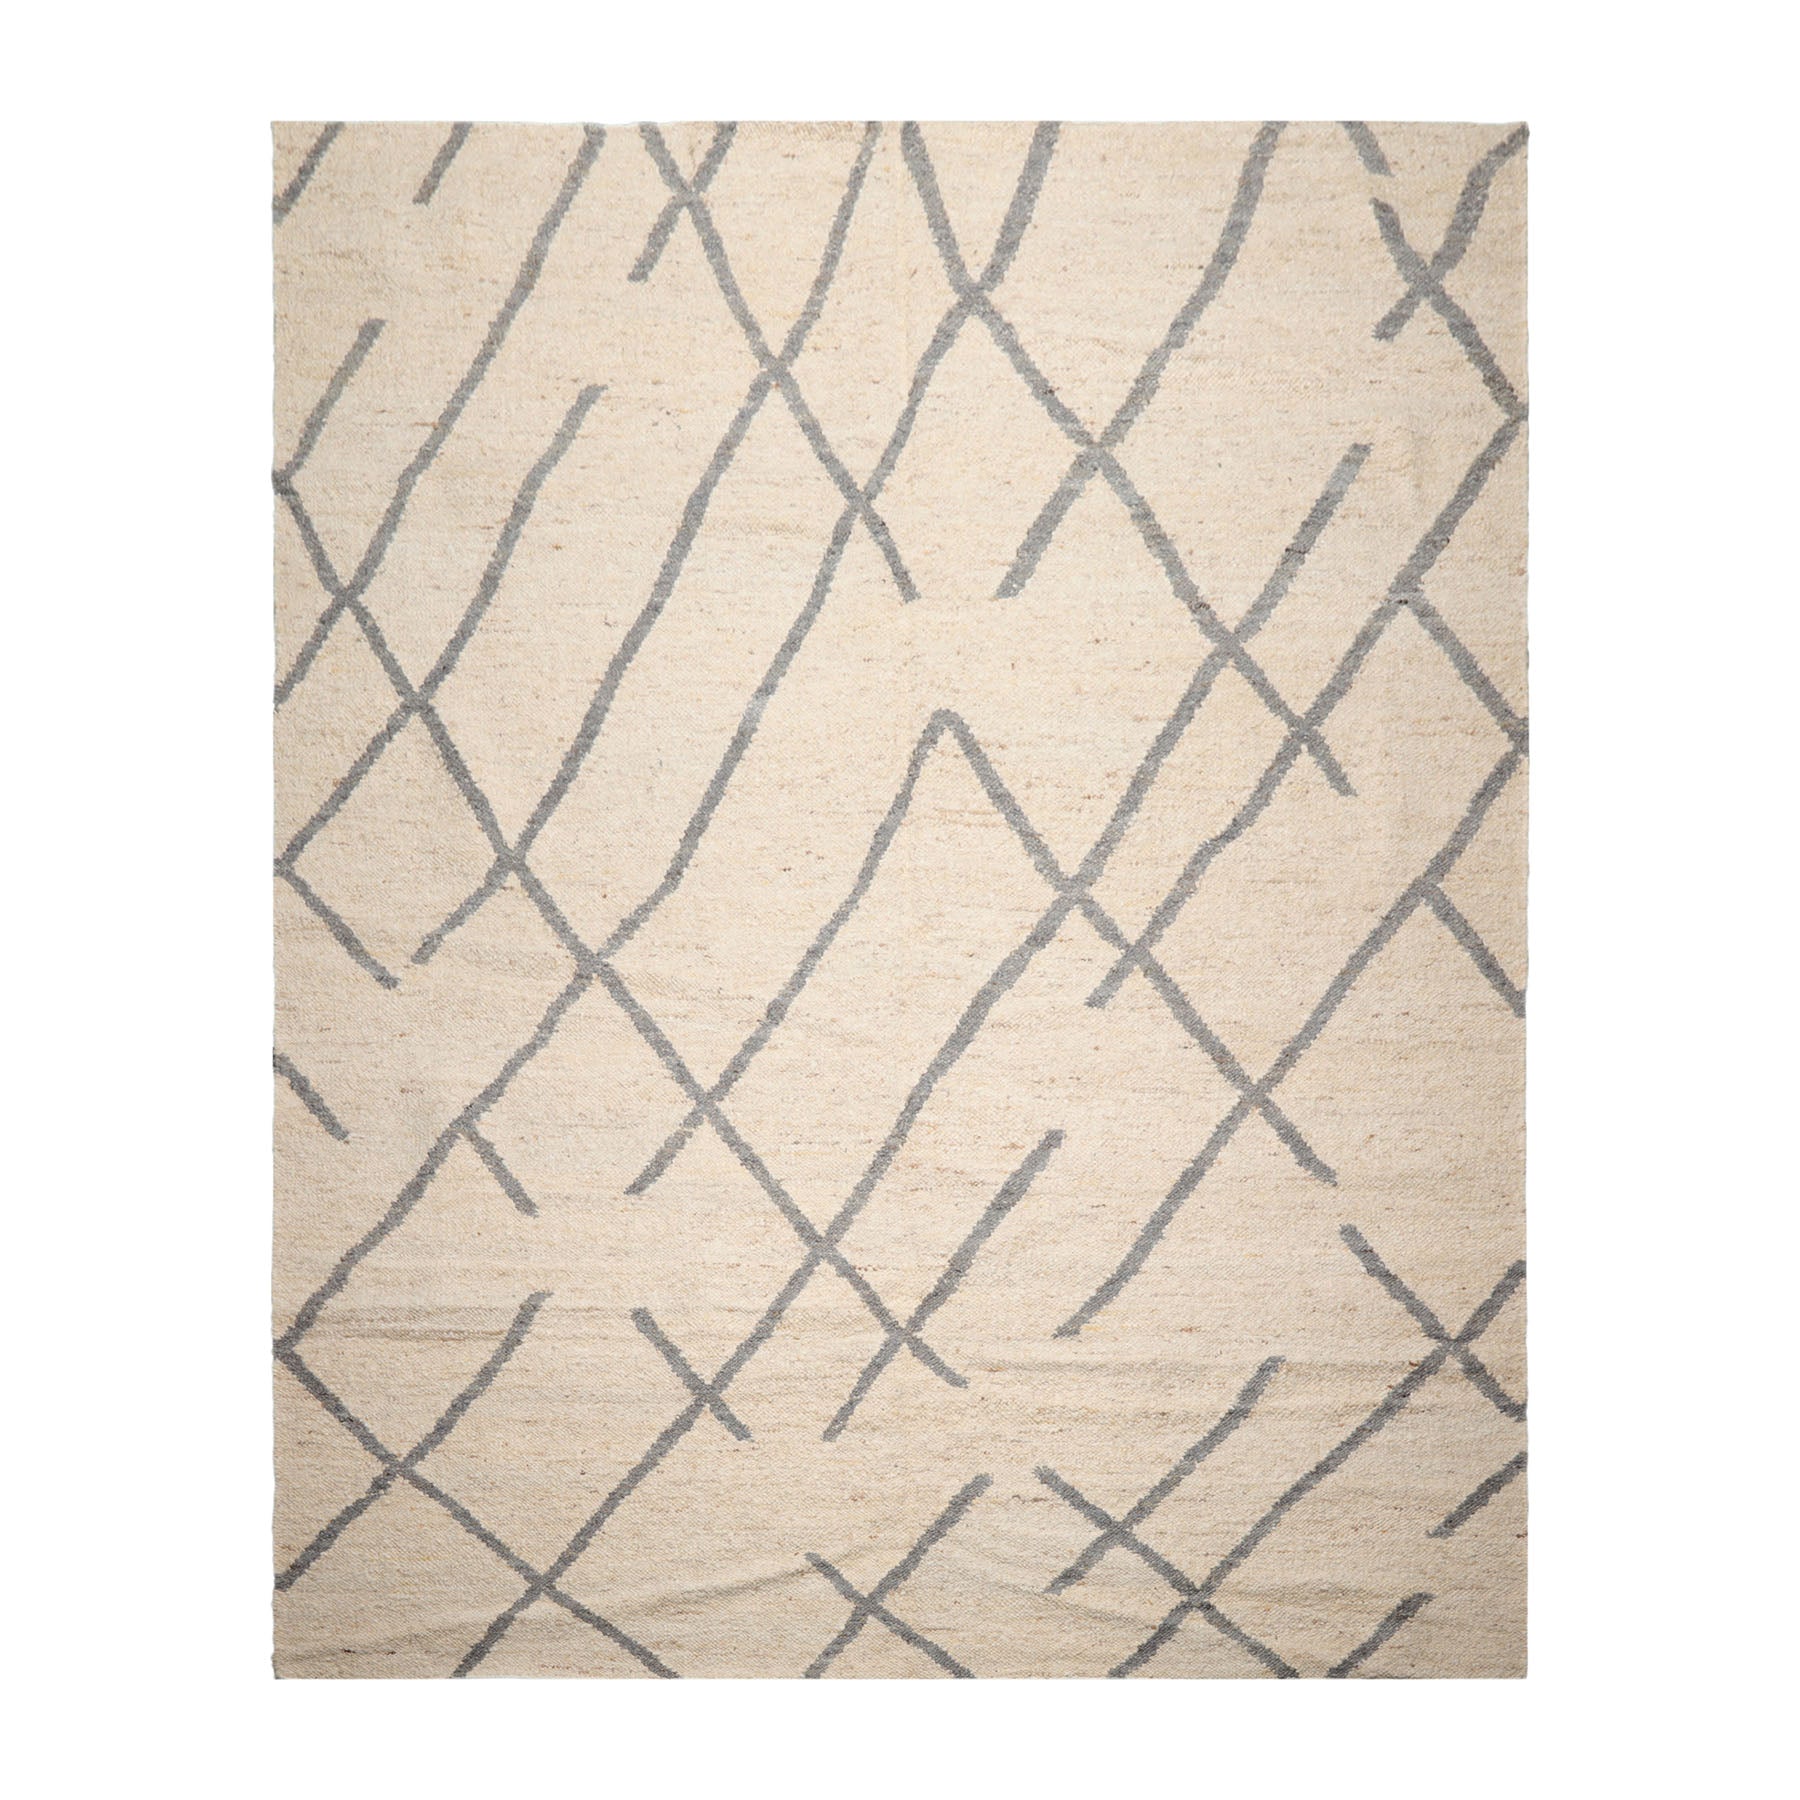 10' 6''x14' 11'' Oatmeal Beige Gray Color Hand Woven Flat Weave 100% Wool Modern & Contemporary Oriental Rug